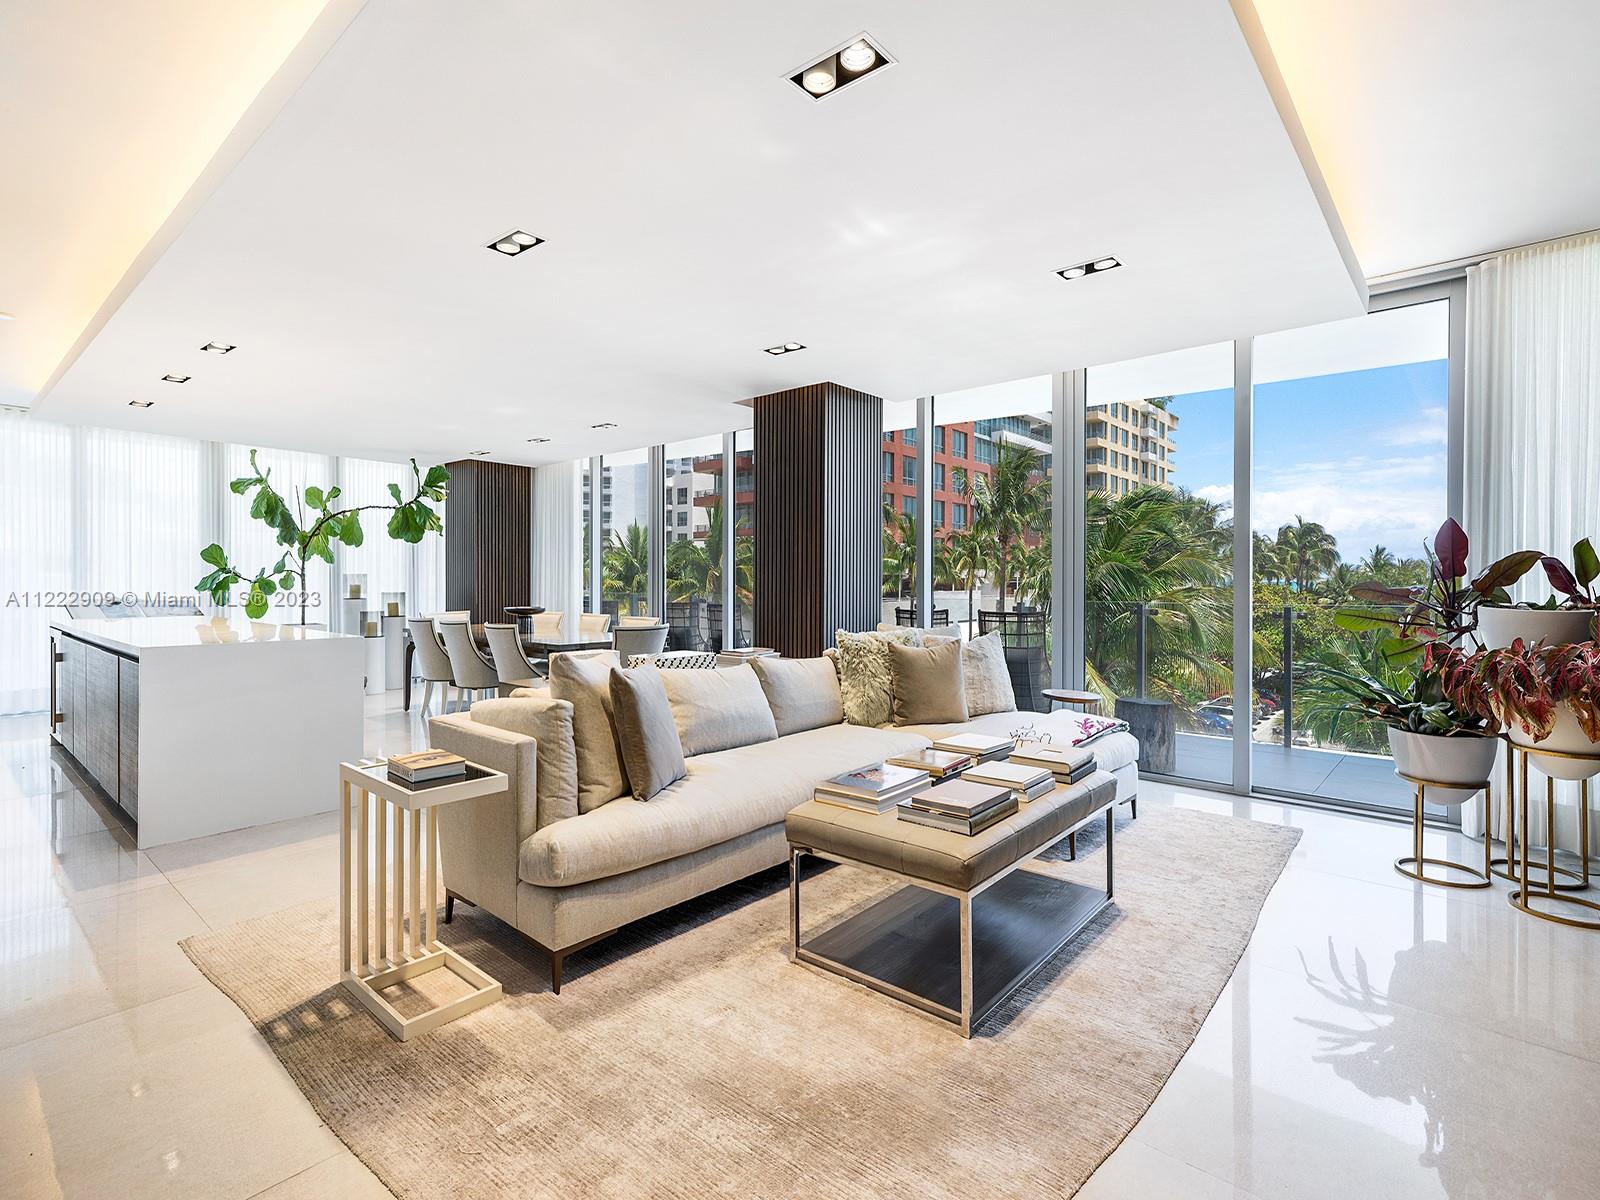 Listing Image 1 Collins Ave #308